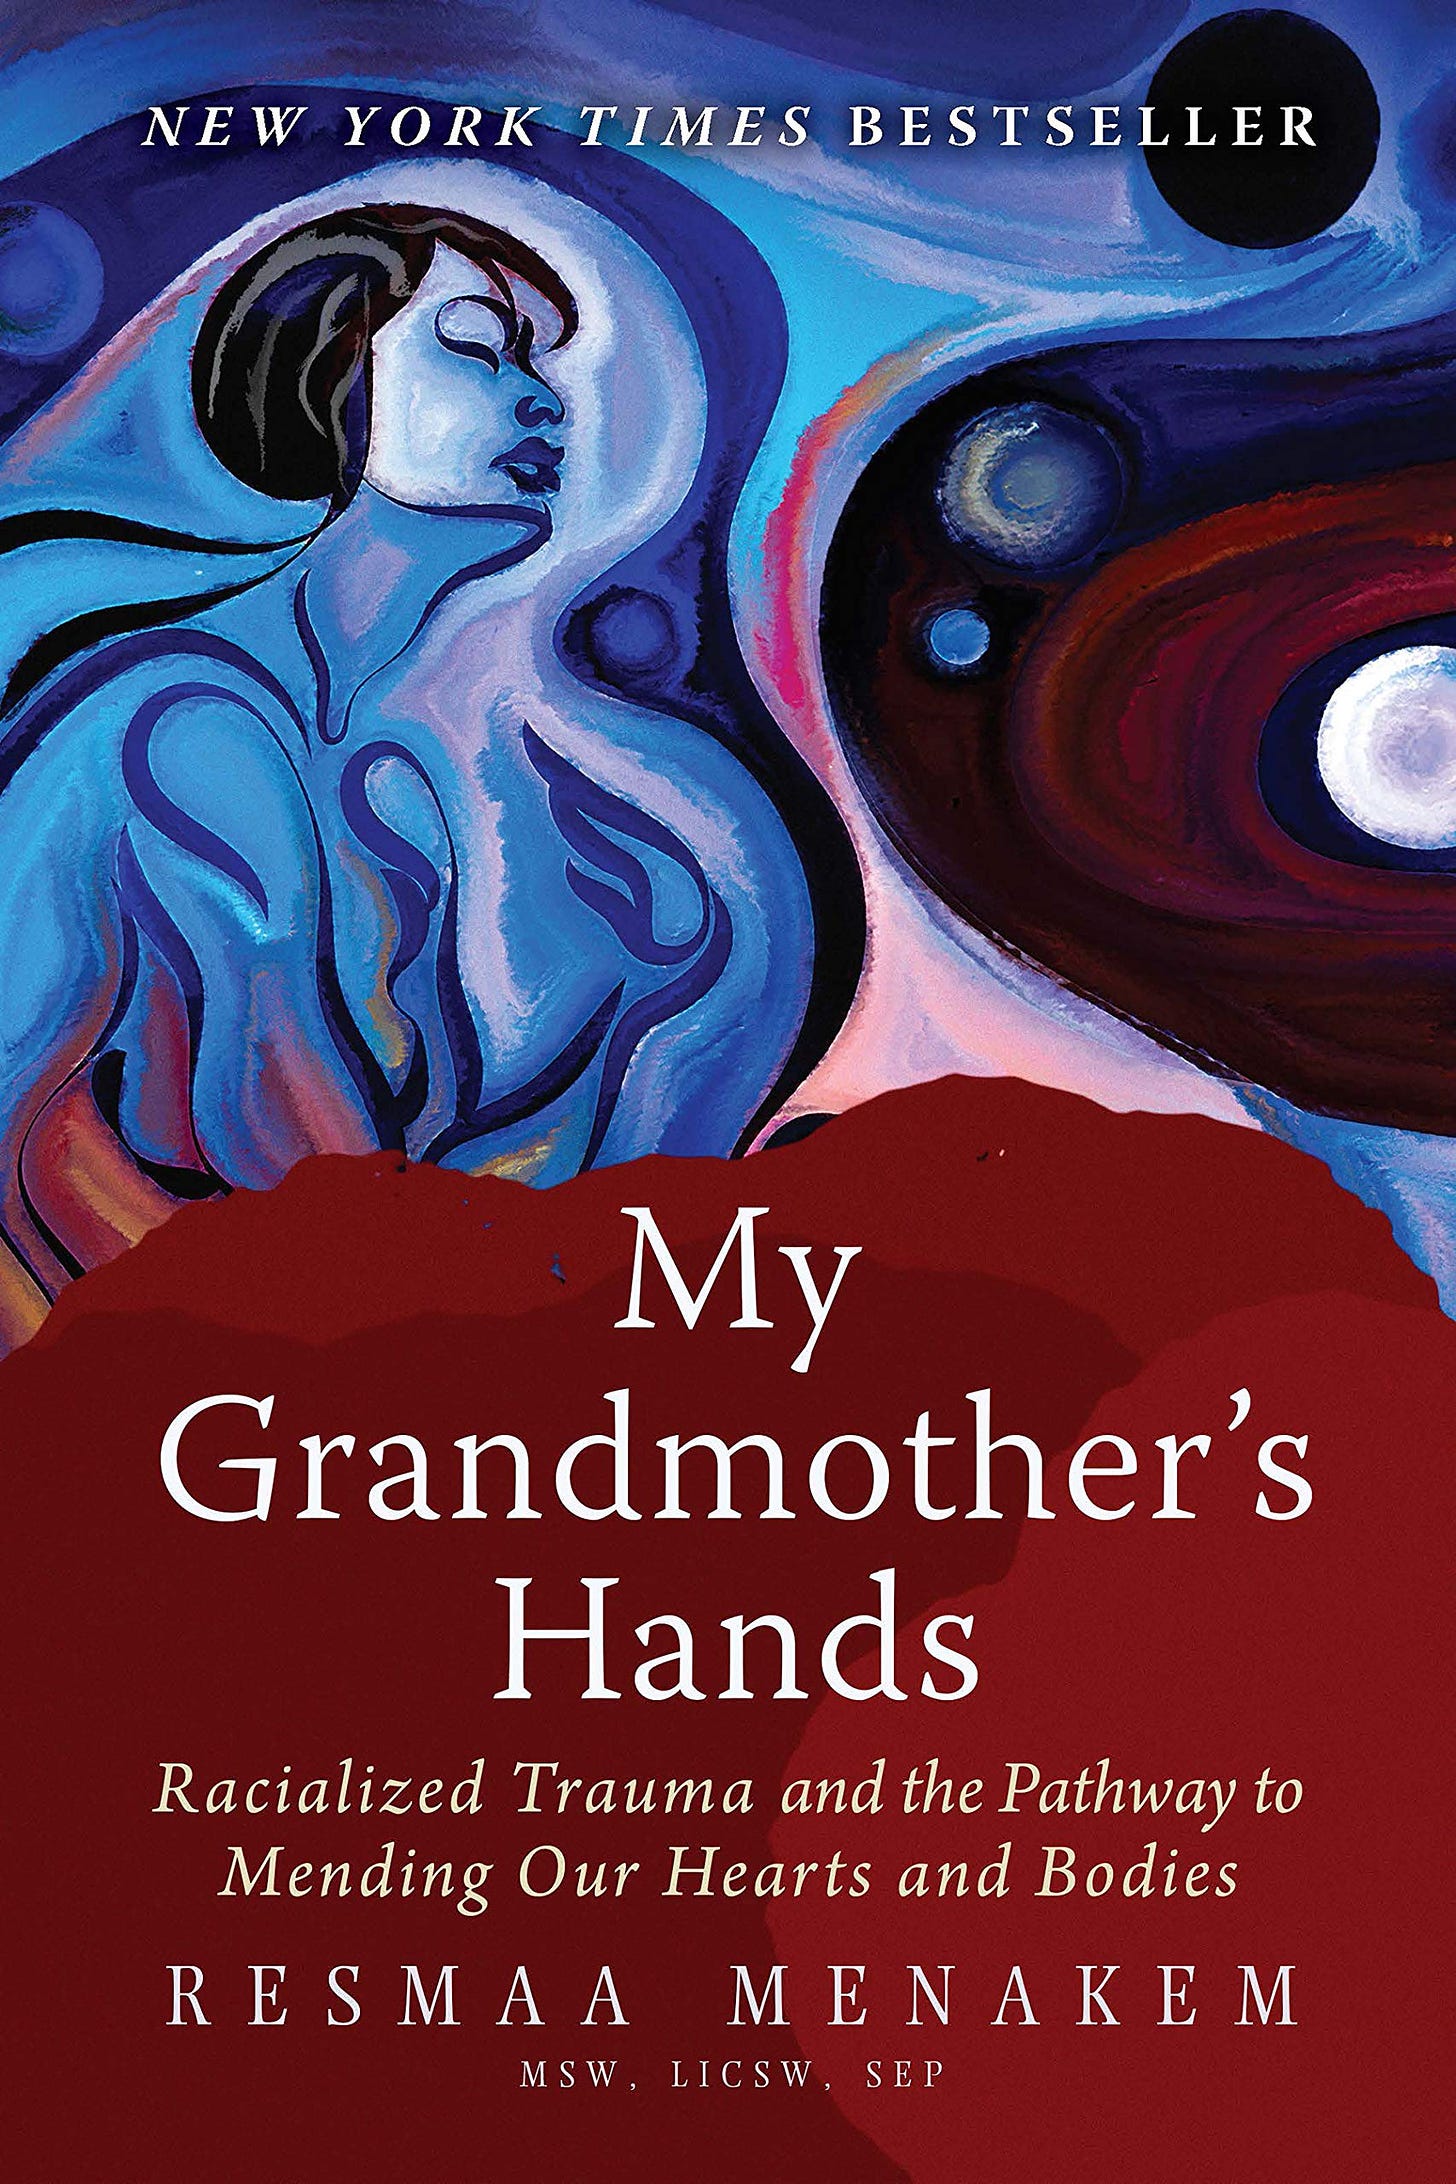 The cover of my grandmother’s hands 